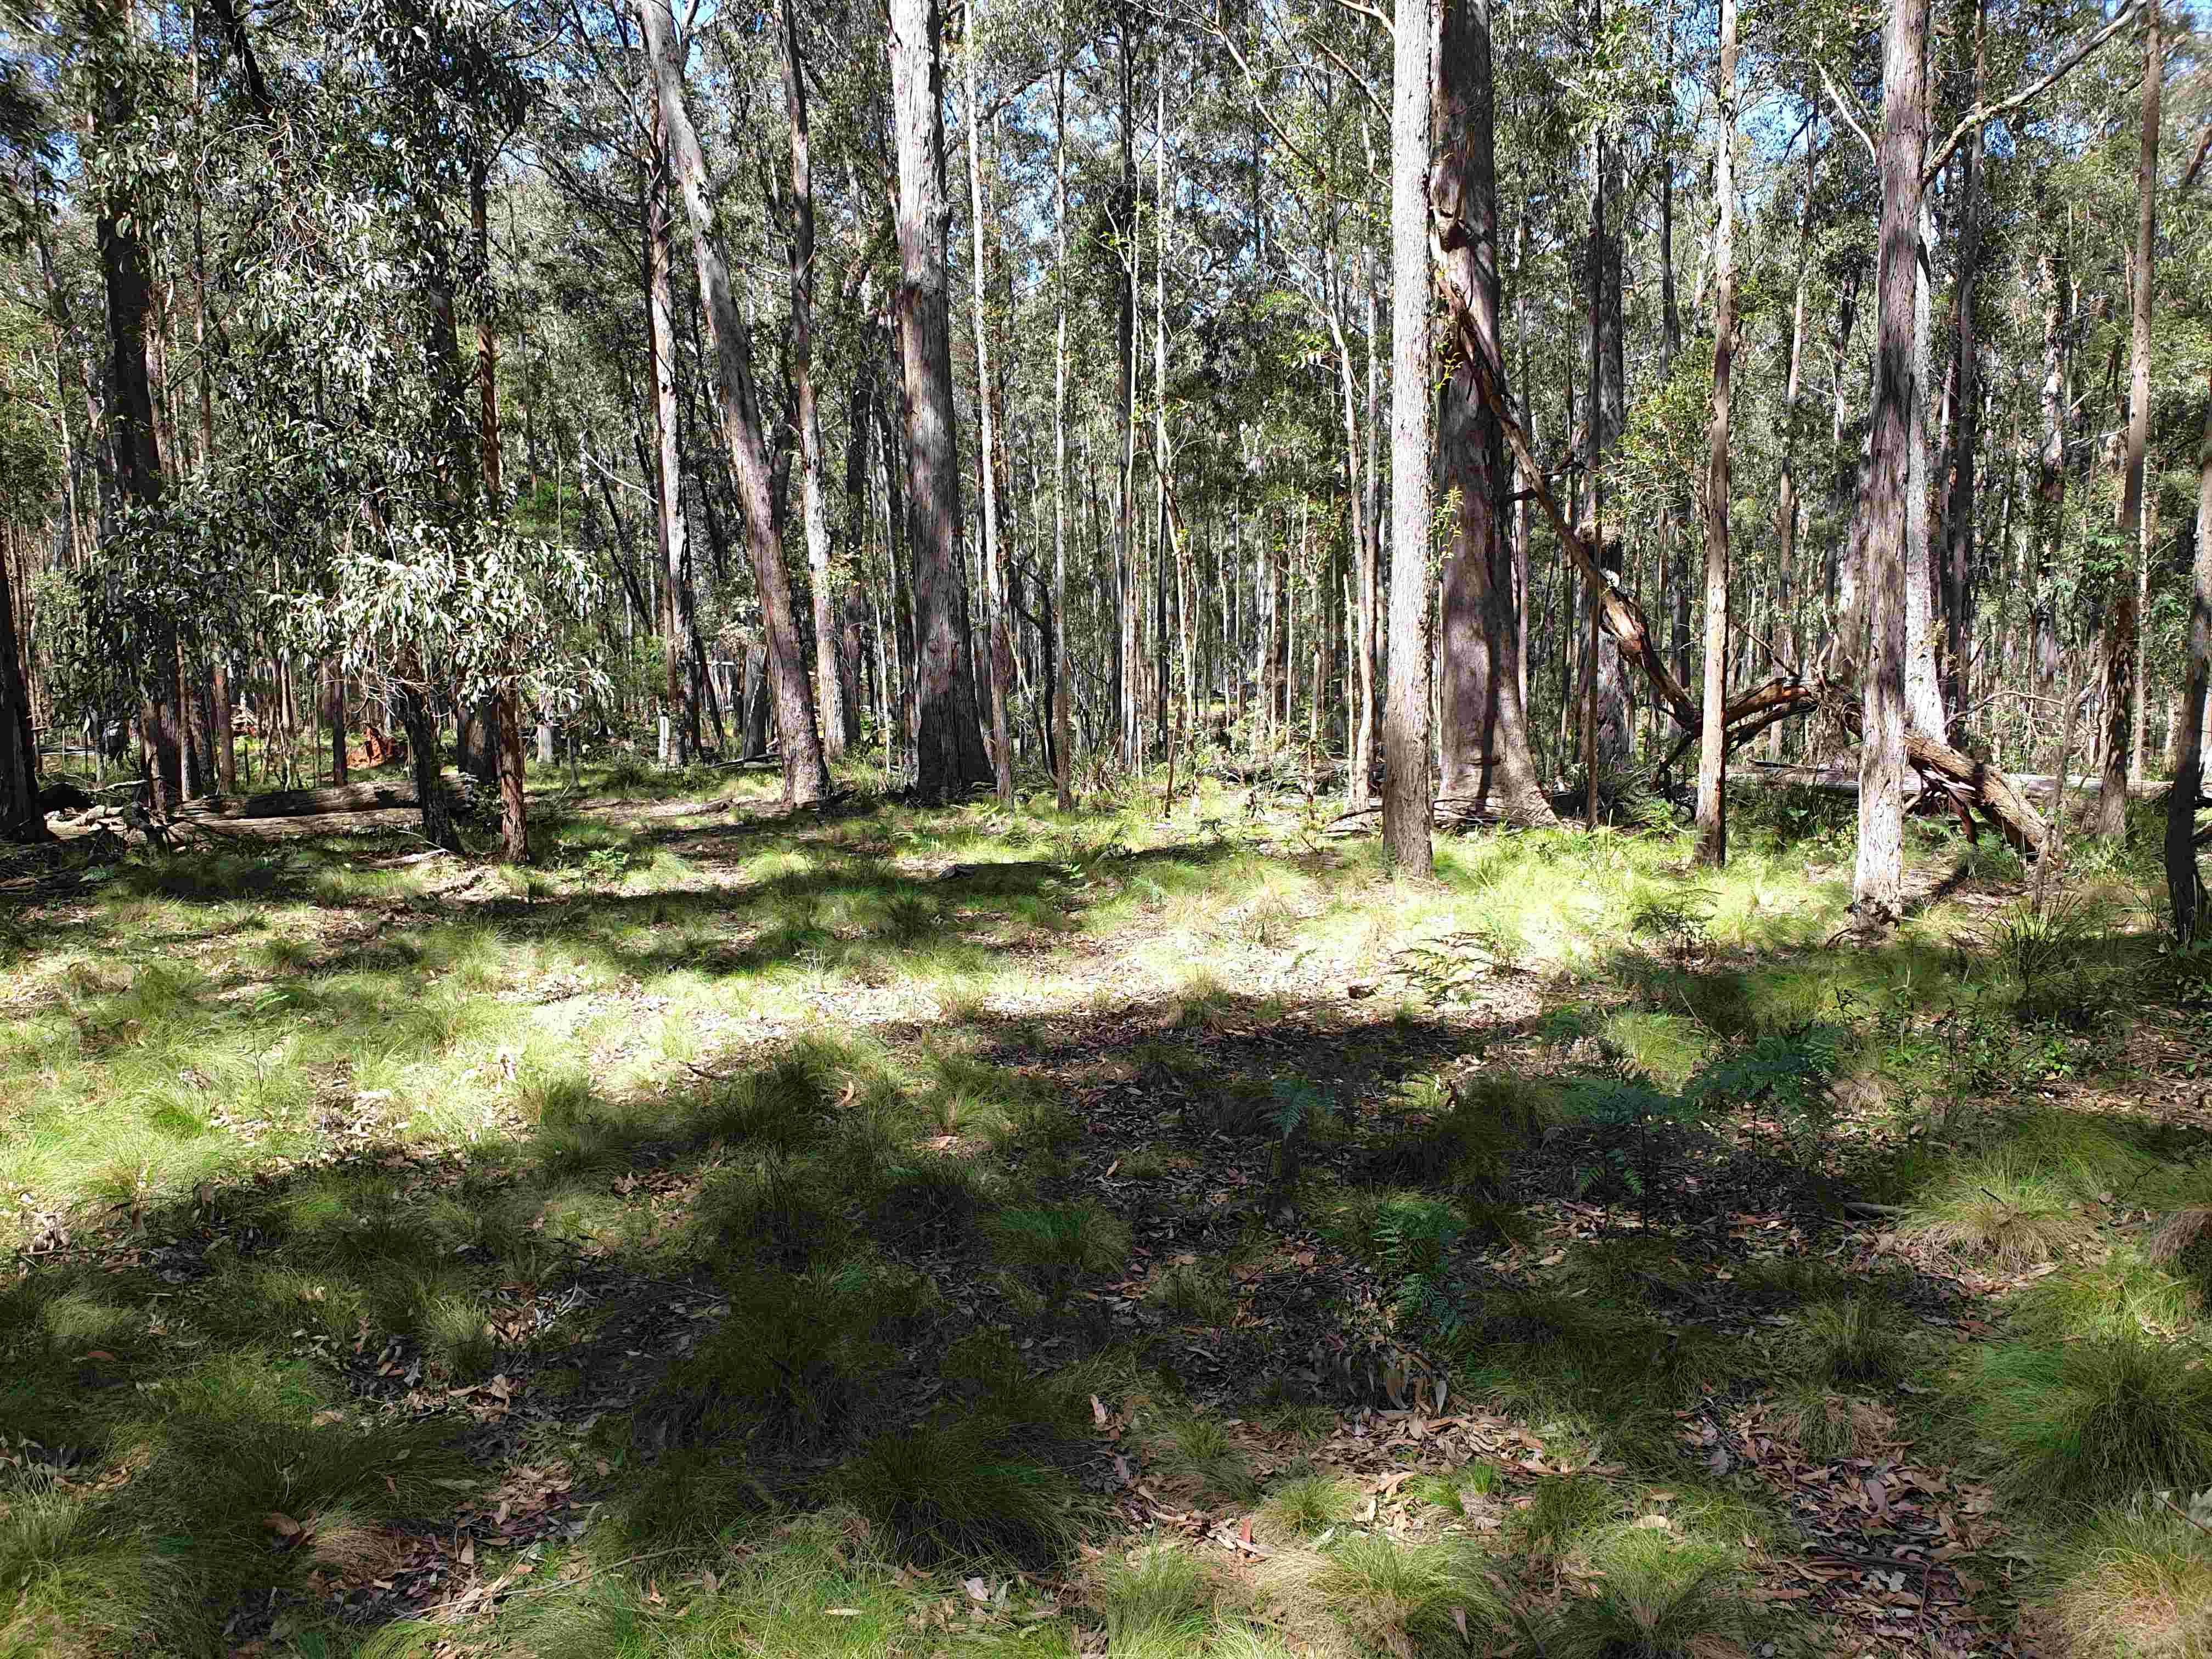 Grassy woodland on basalt above the escarpment on the eastern side of Myall Creek in Nowendoc National Park 